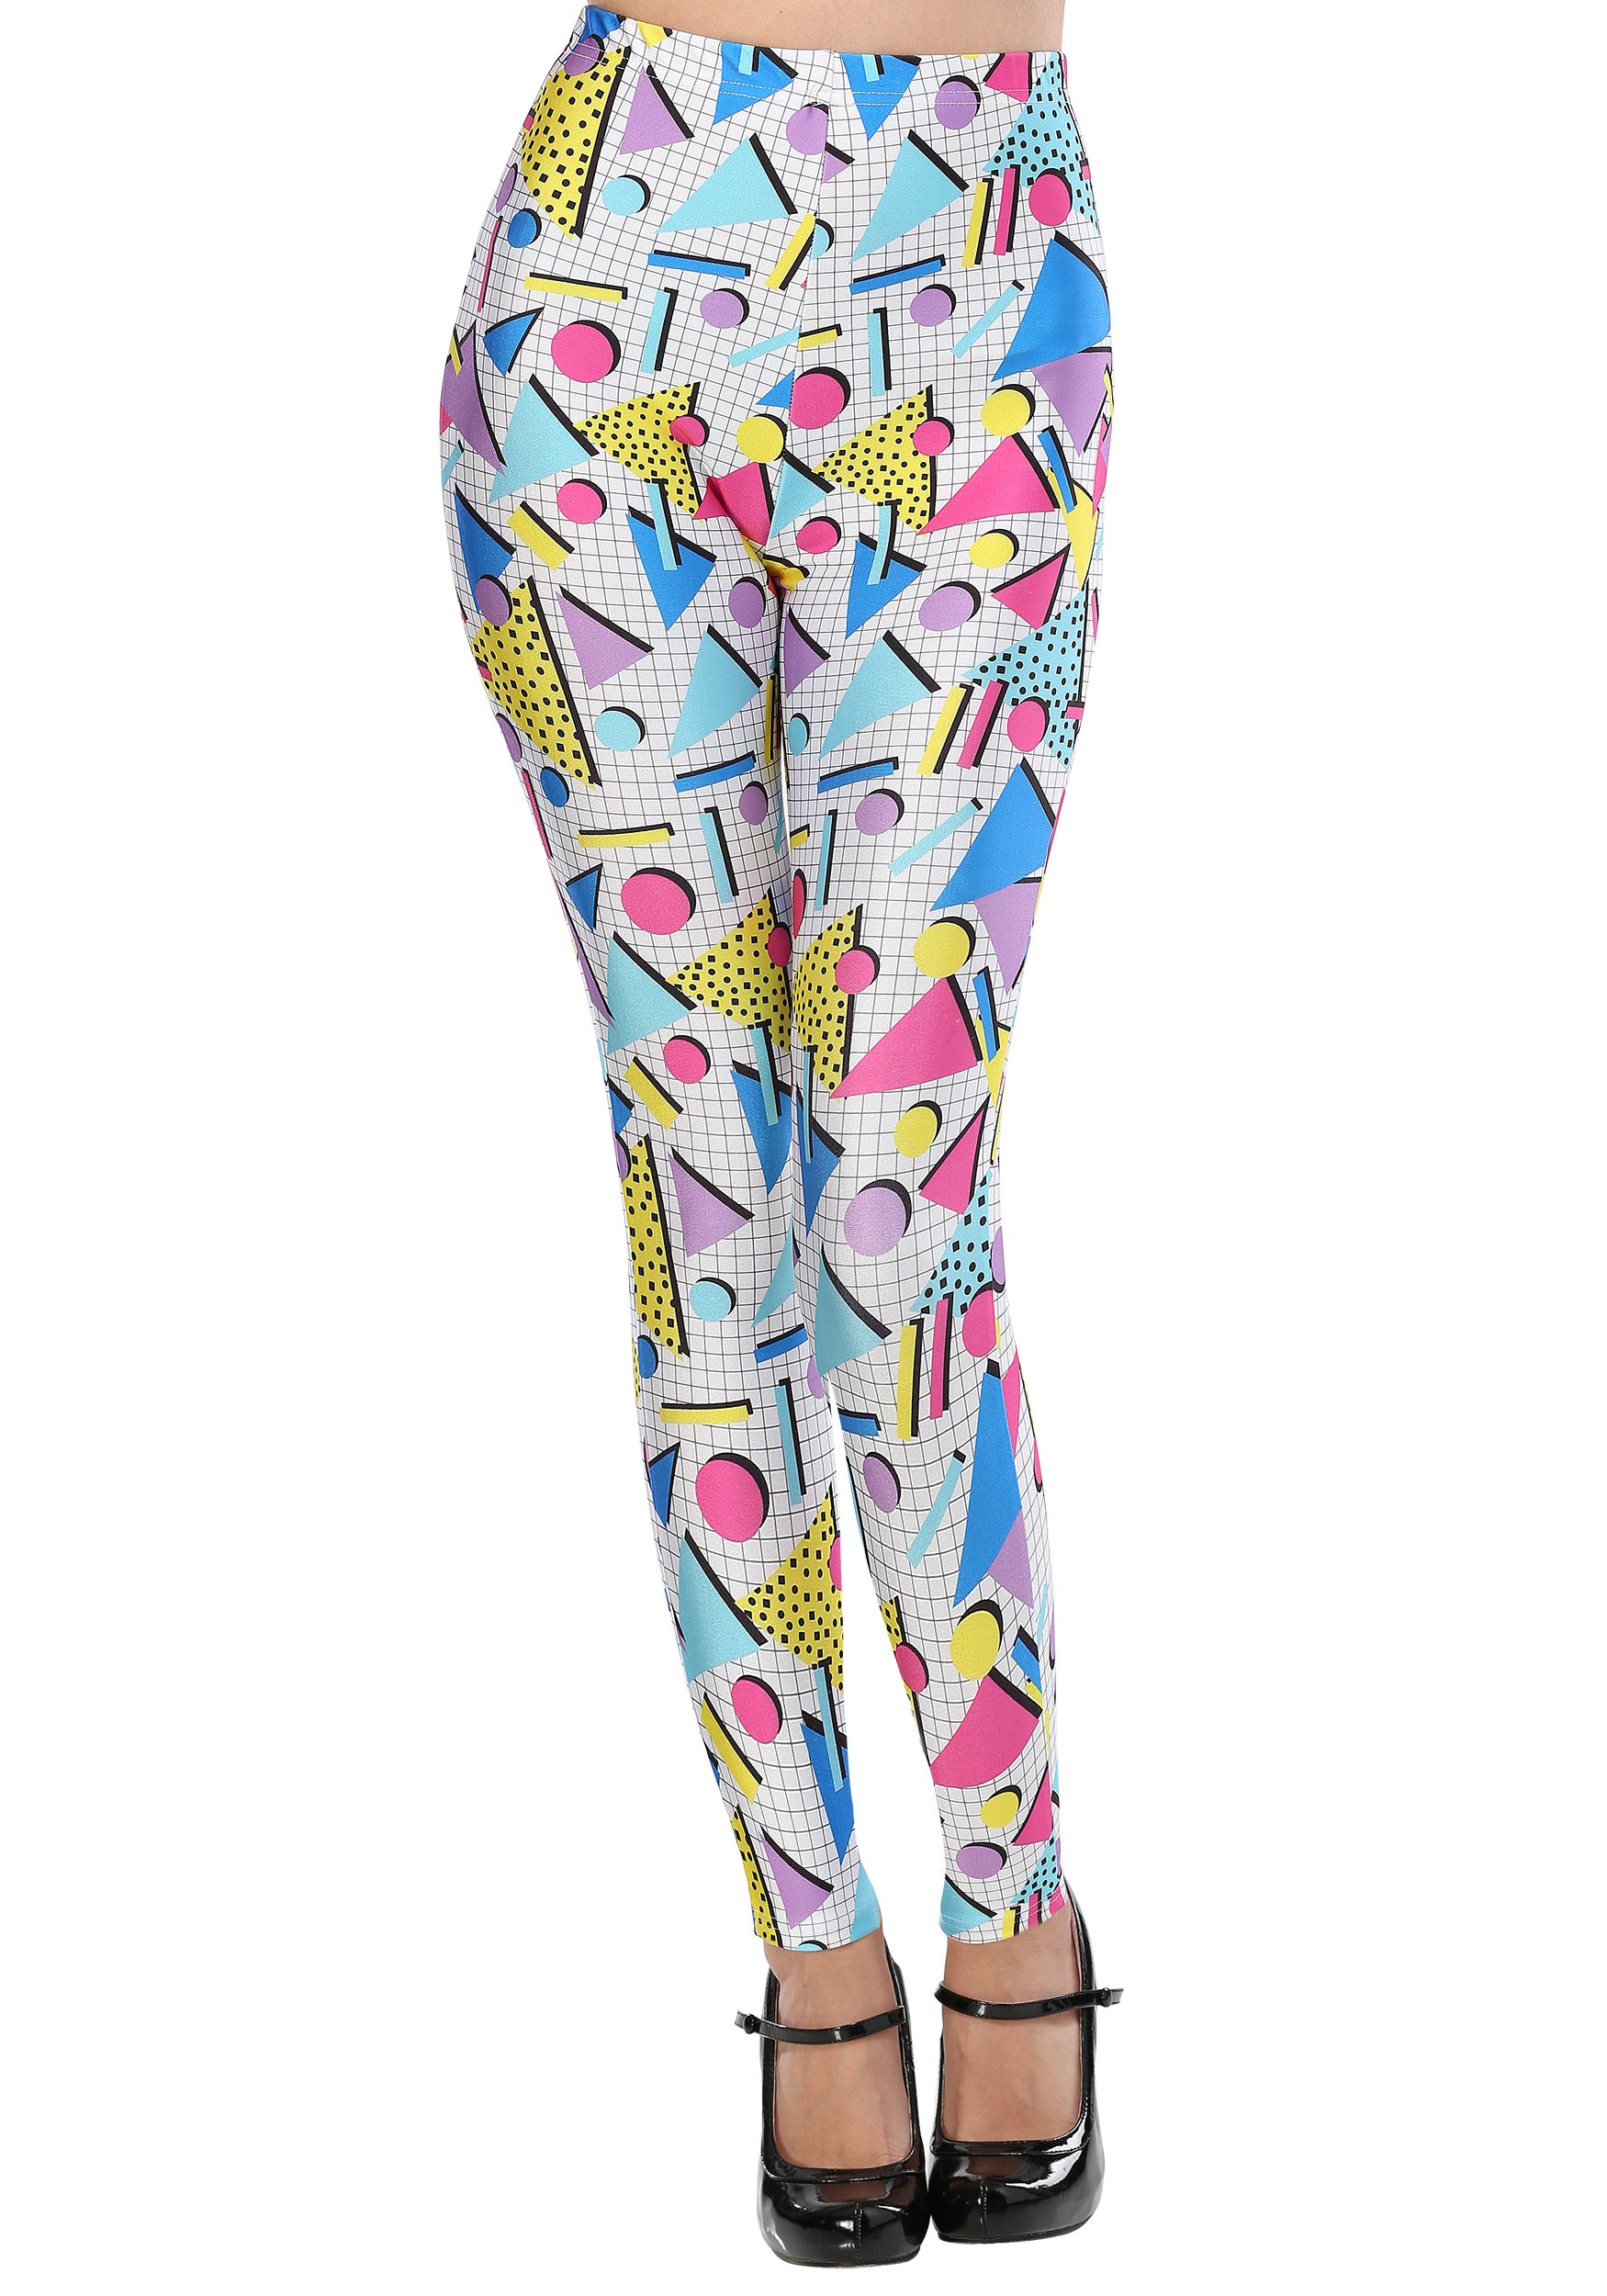 https://images.fun.com/products/43947/1-1/80s-party-girl-adult-leggings.jpg